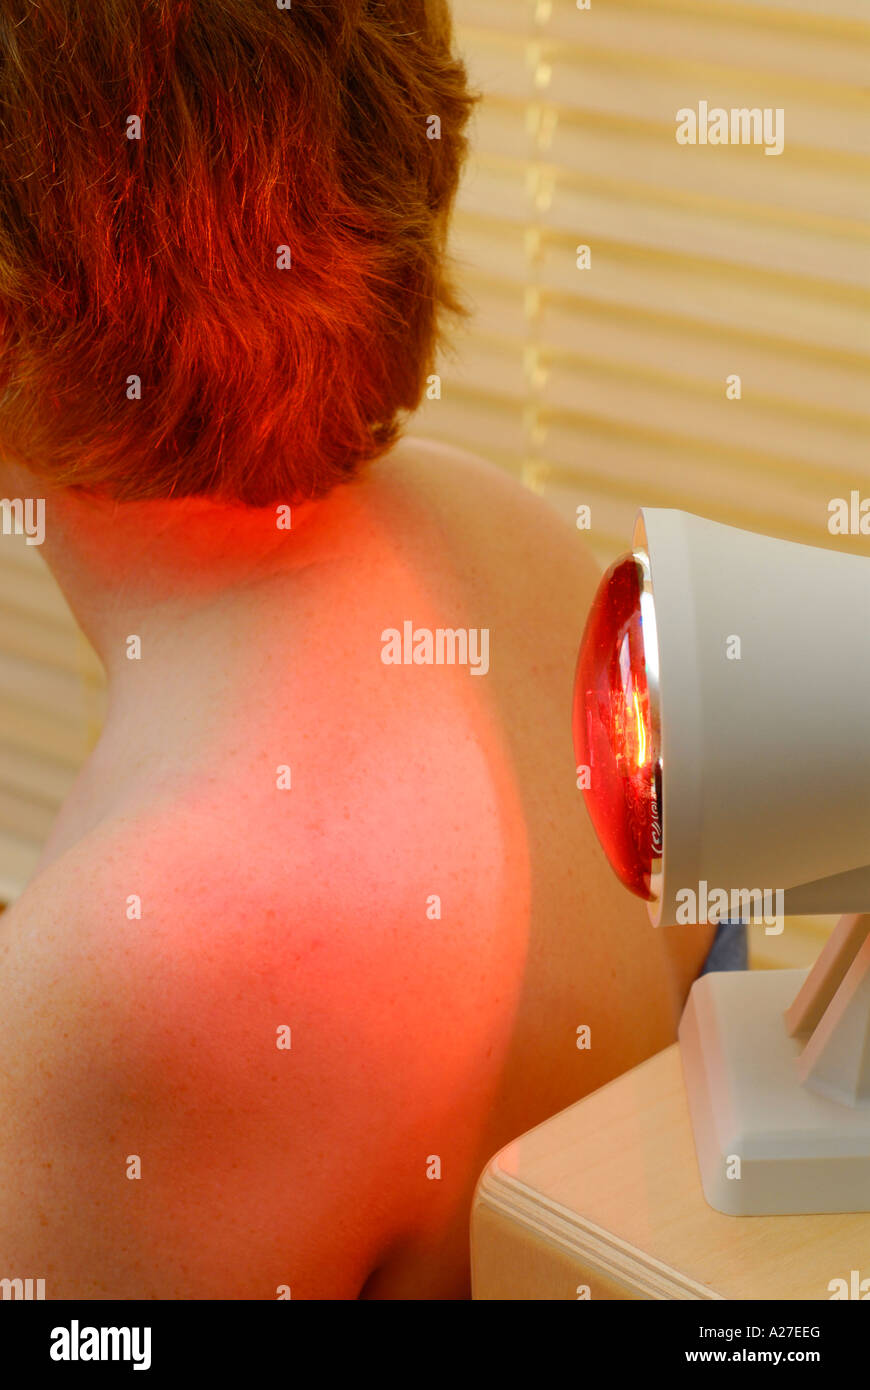 Heat radiation of the shoulder Stock Photo